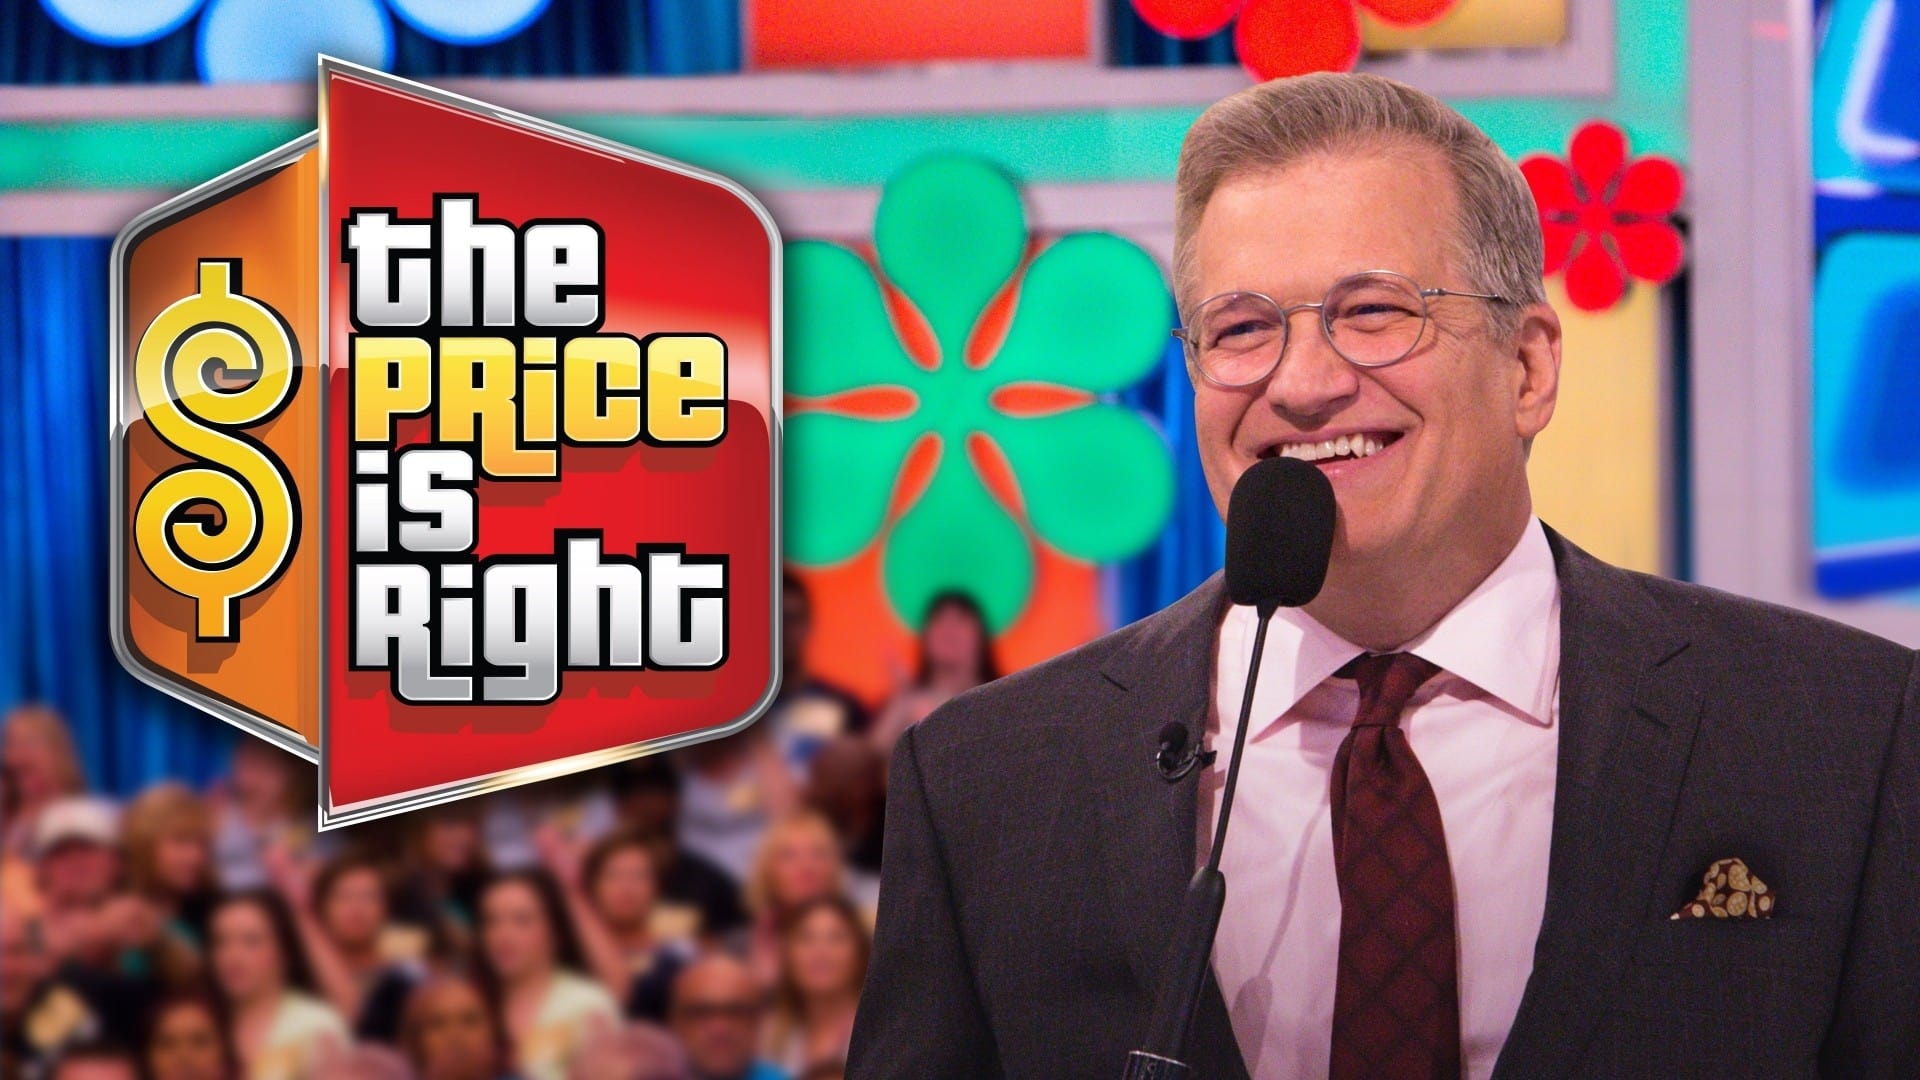 The Price Is Right - Season 5 Episode 51 : The Price Is Right Season 5 Episode 51